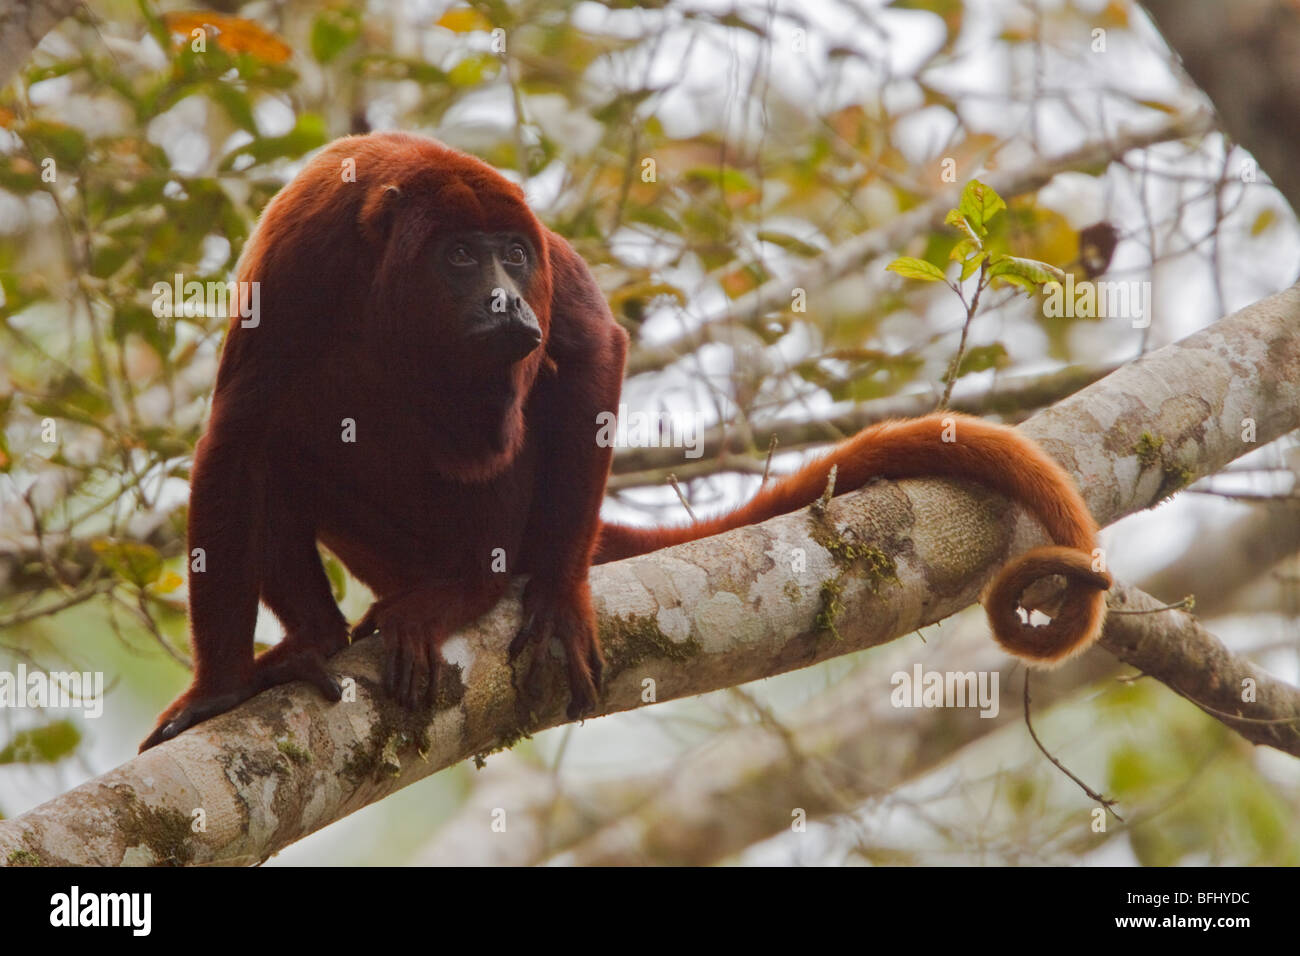 A Monkey perched in a tree in Amazonian Ecuador. Stock Photo